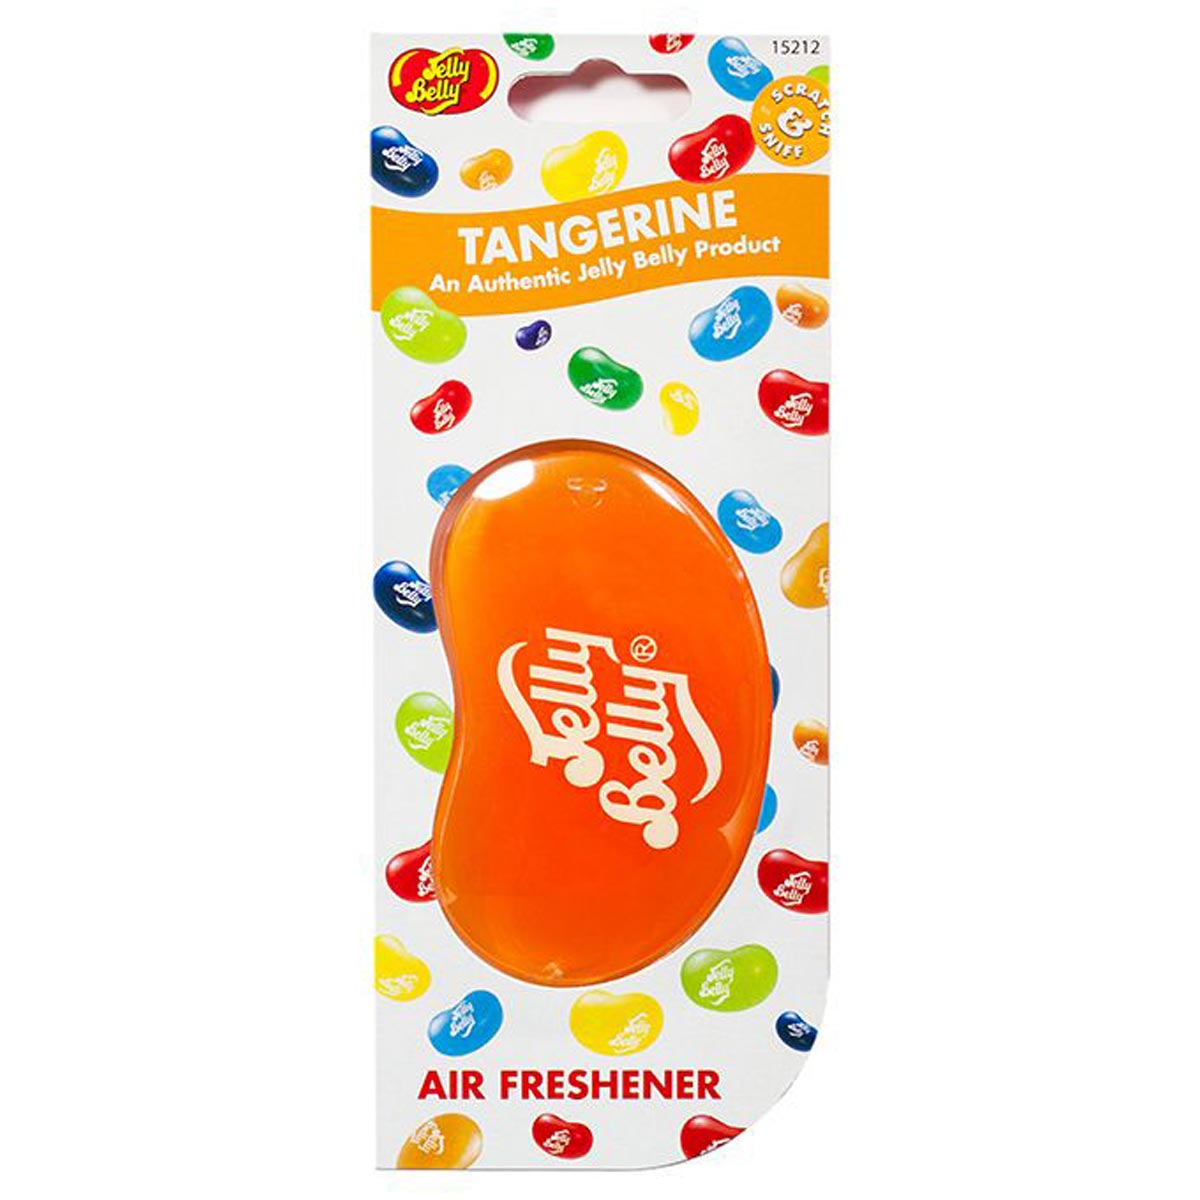 Super strong in the smell department! The Jelly Belly 3D Gel hanging car & home air freshener packs a punch when it comes to fragrance. Make your car journey or home more enjoyable with a scent just how you like it.